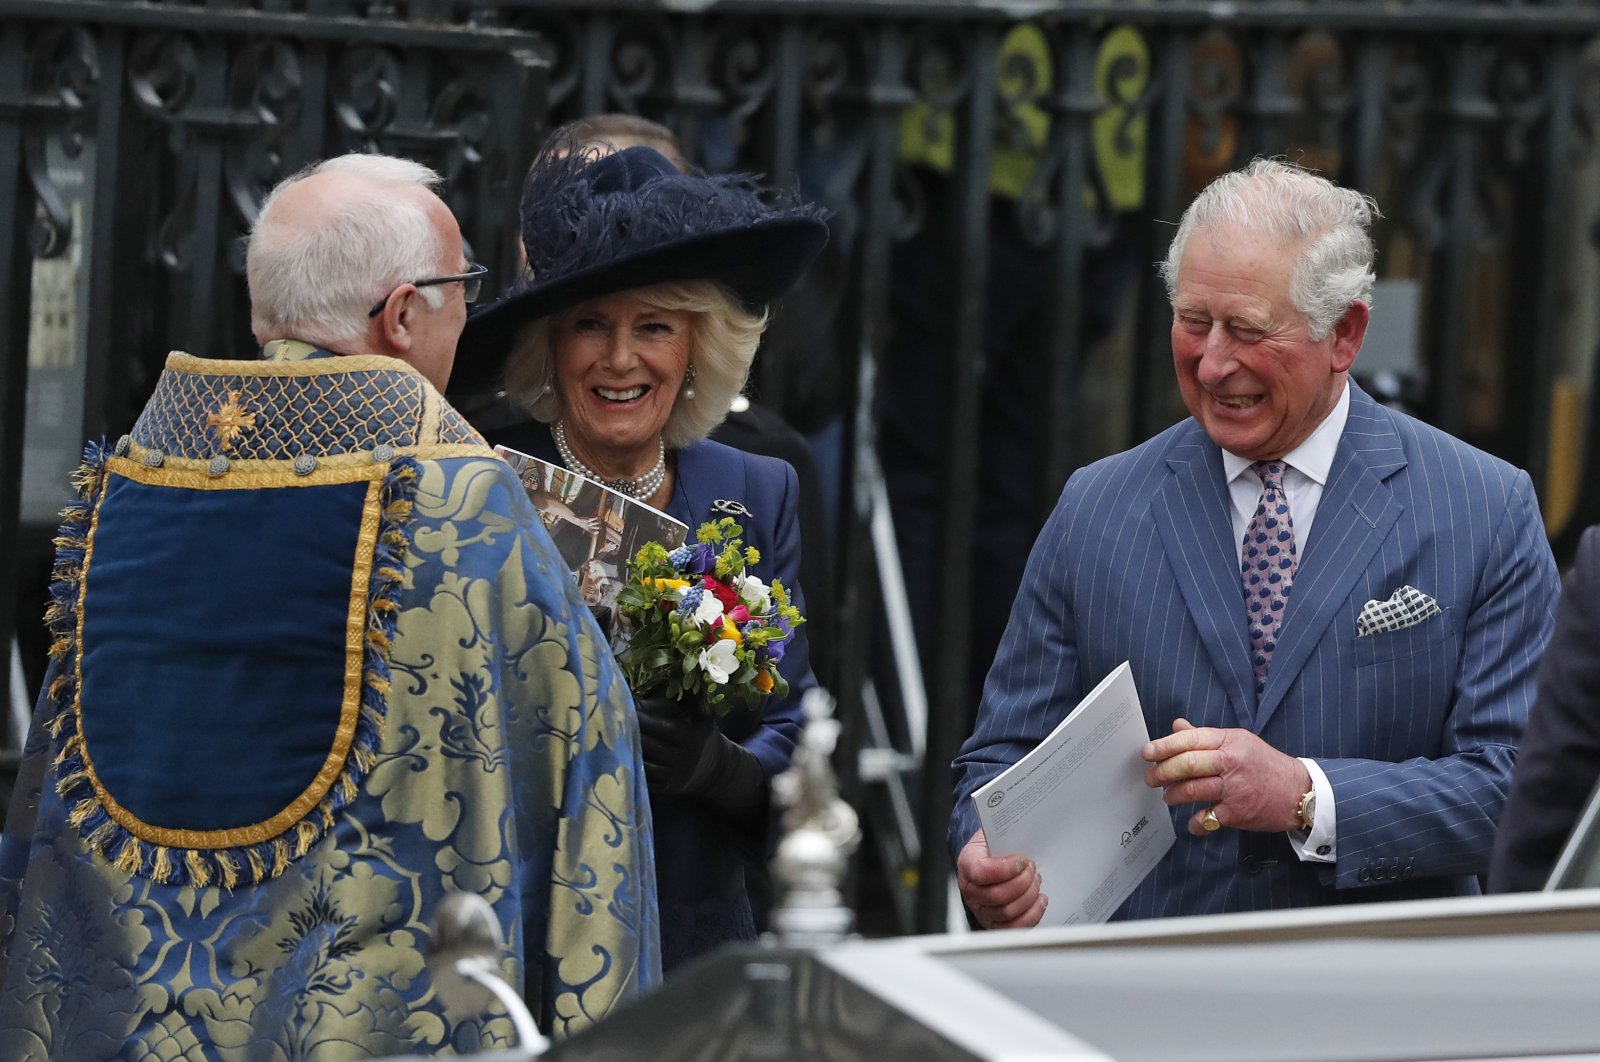 Britain's Prince Charles and Camilla, Duchess of Cornwall, leave after attending the annual Commonwealth Day service at Westminster Abbey in London, Monday, March 9, 2020. (AP Photo)